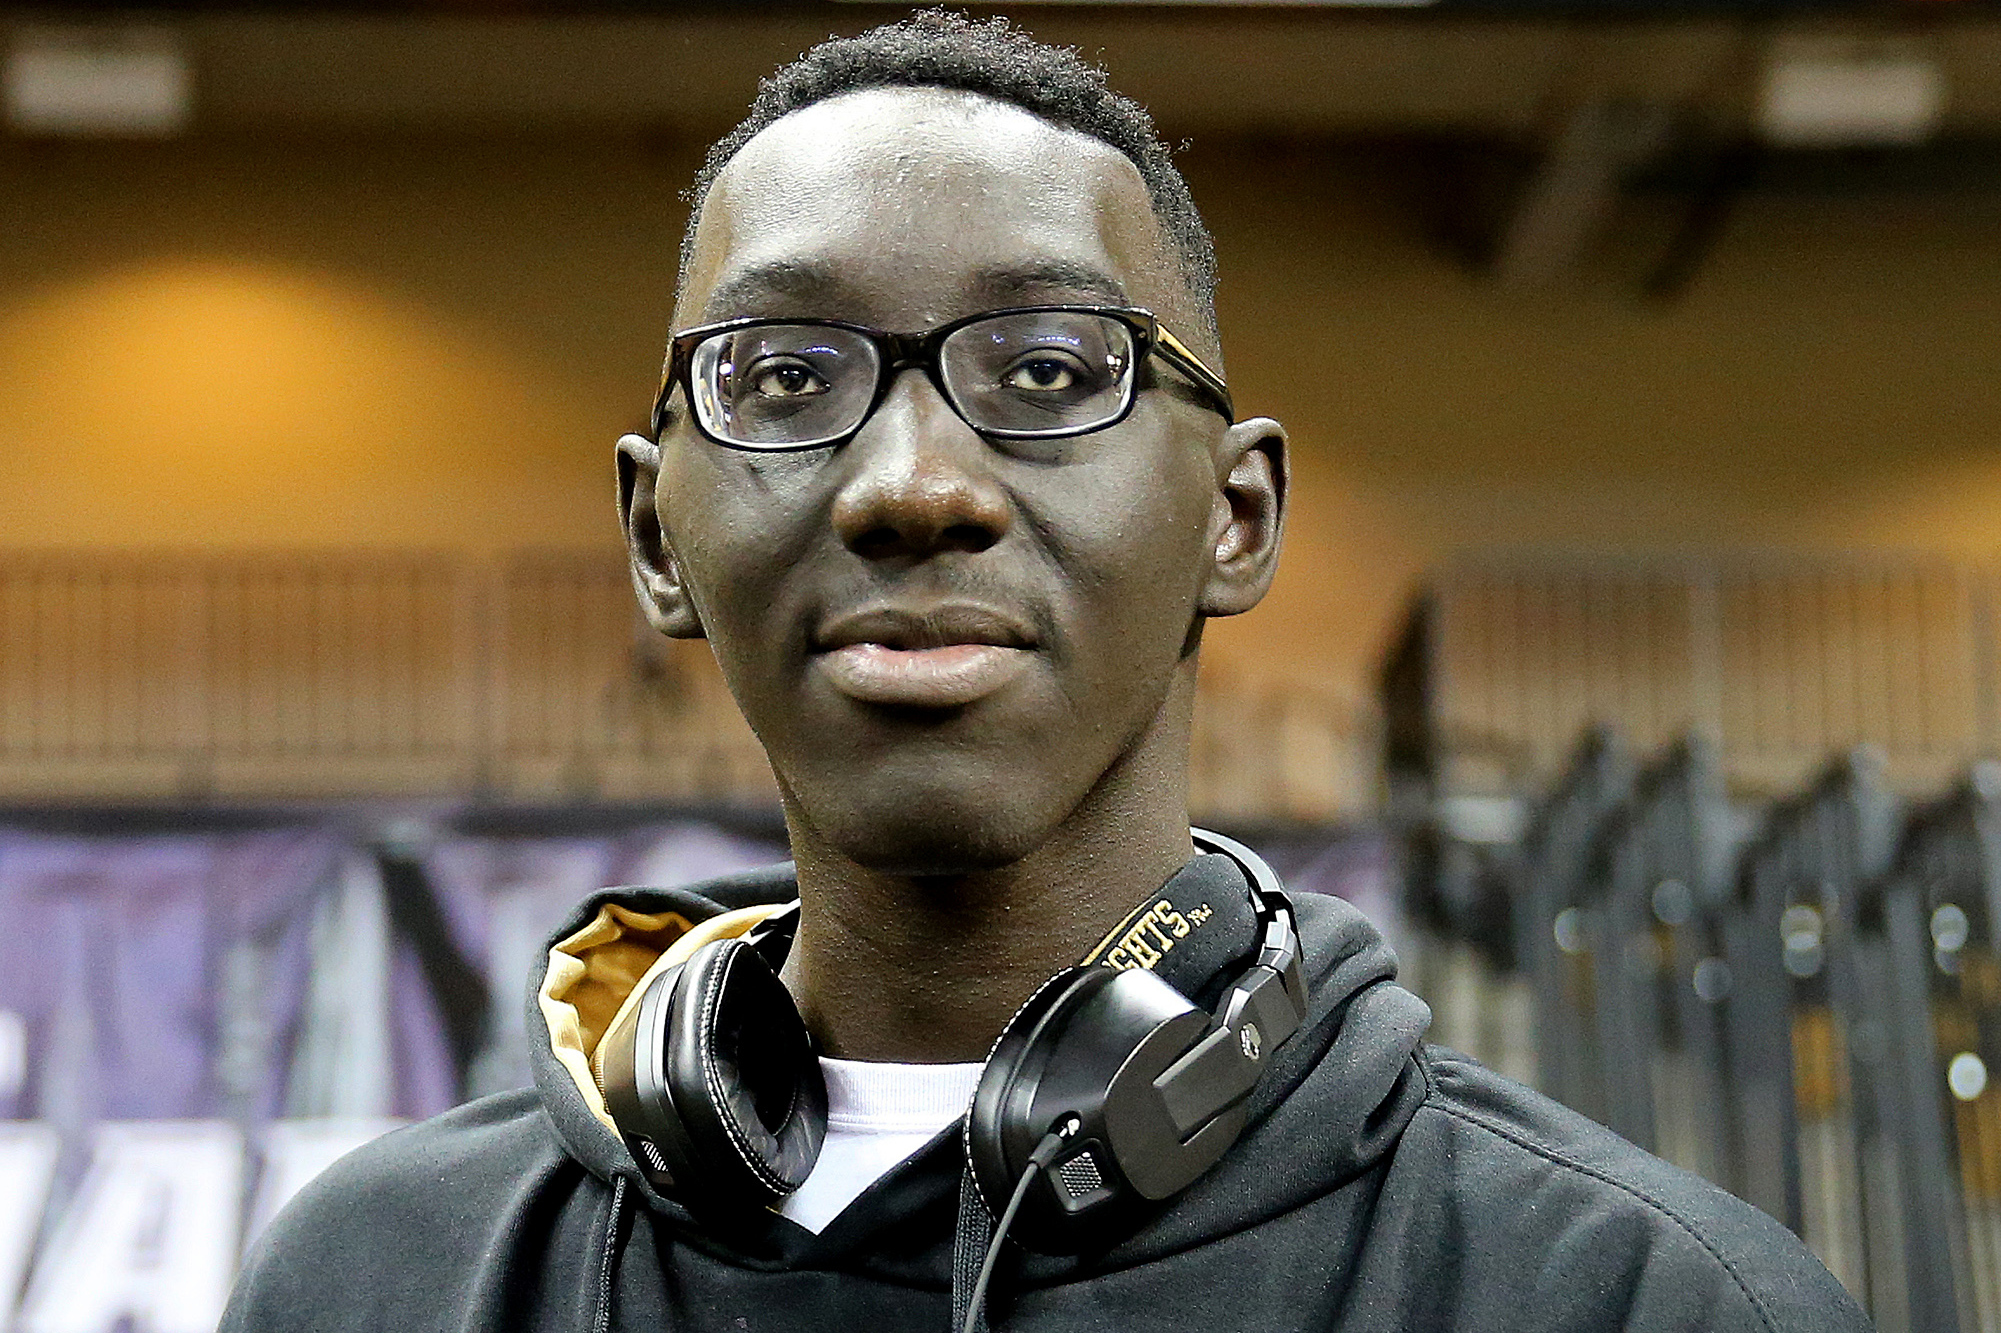 UCF center Tacko Fall withdraws from NBA draft, returns for junior